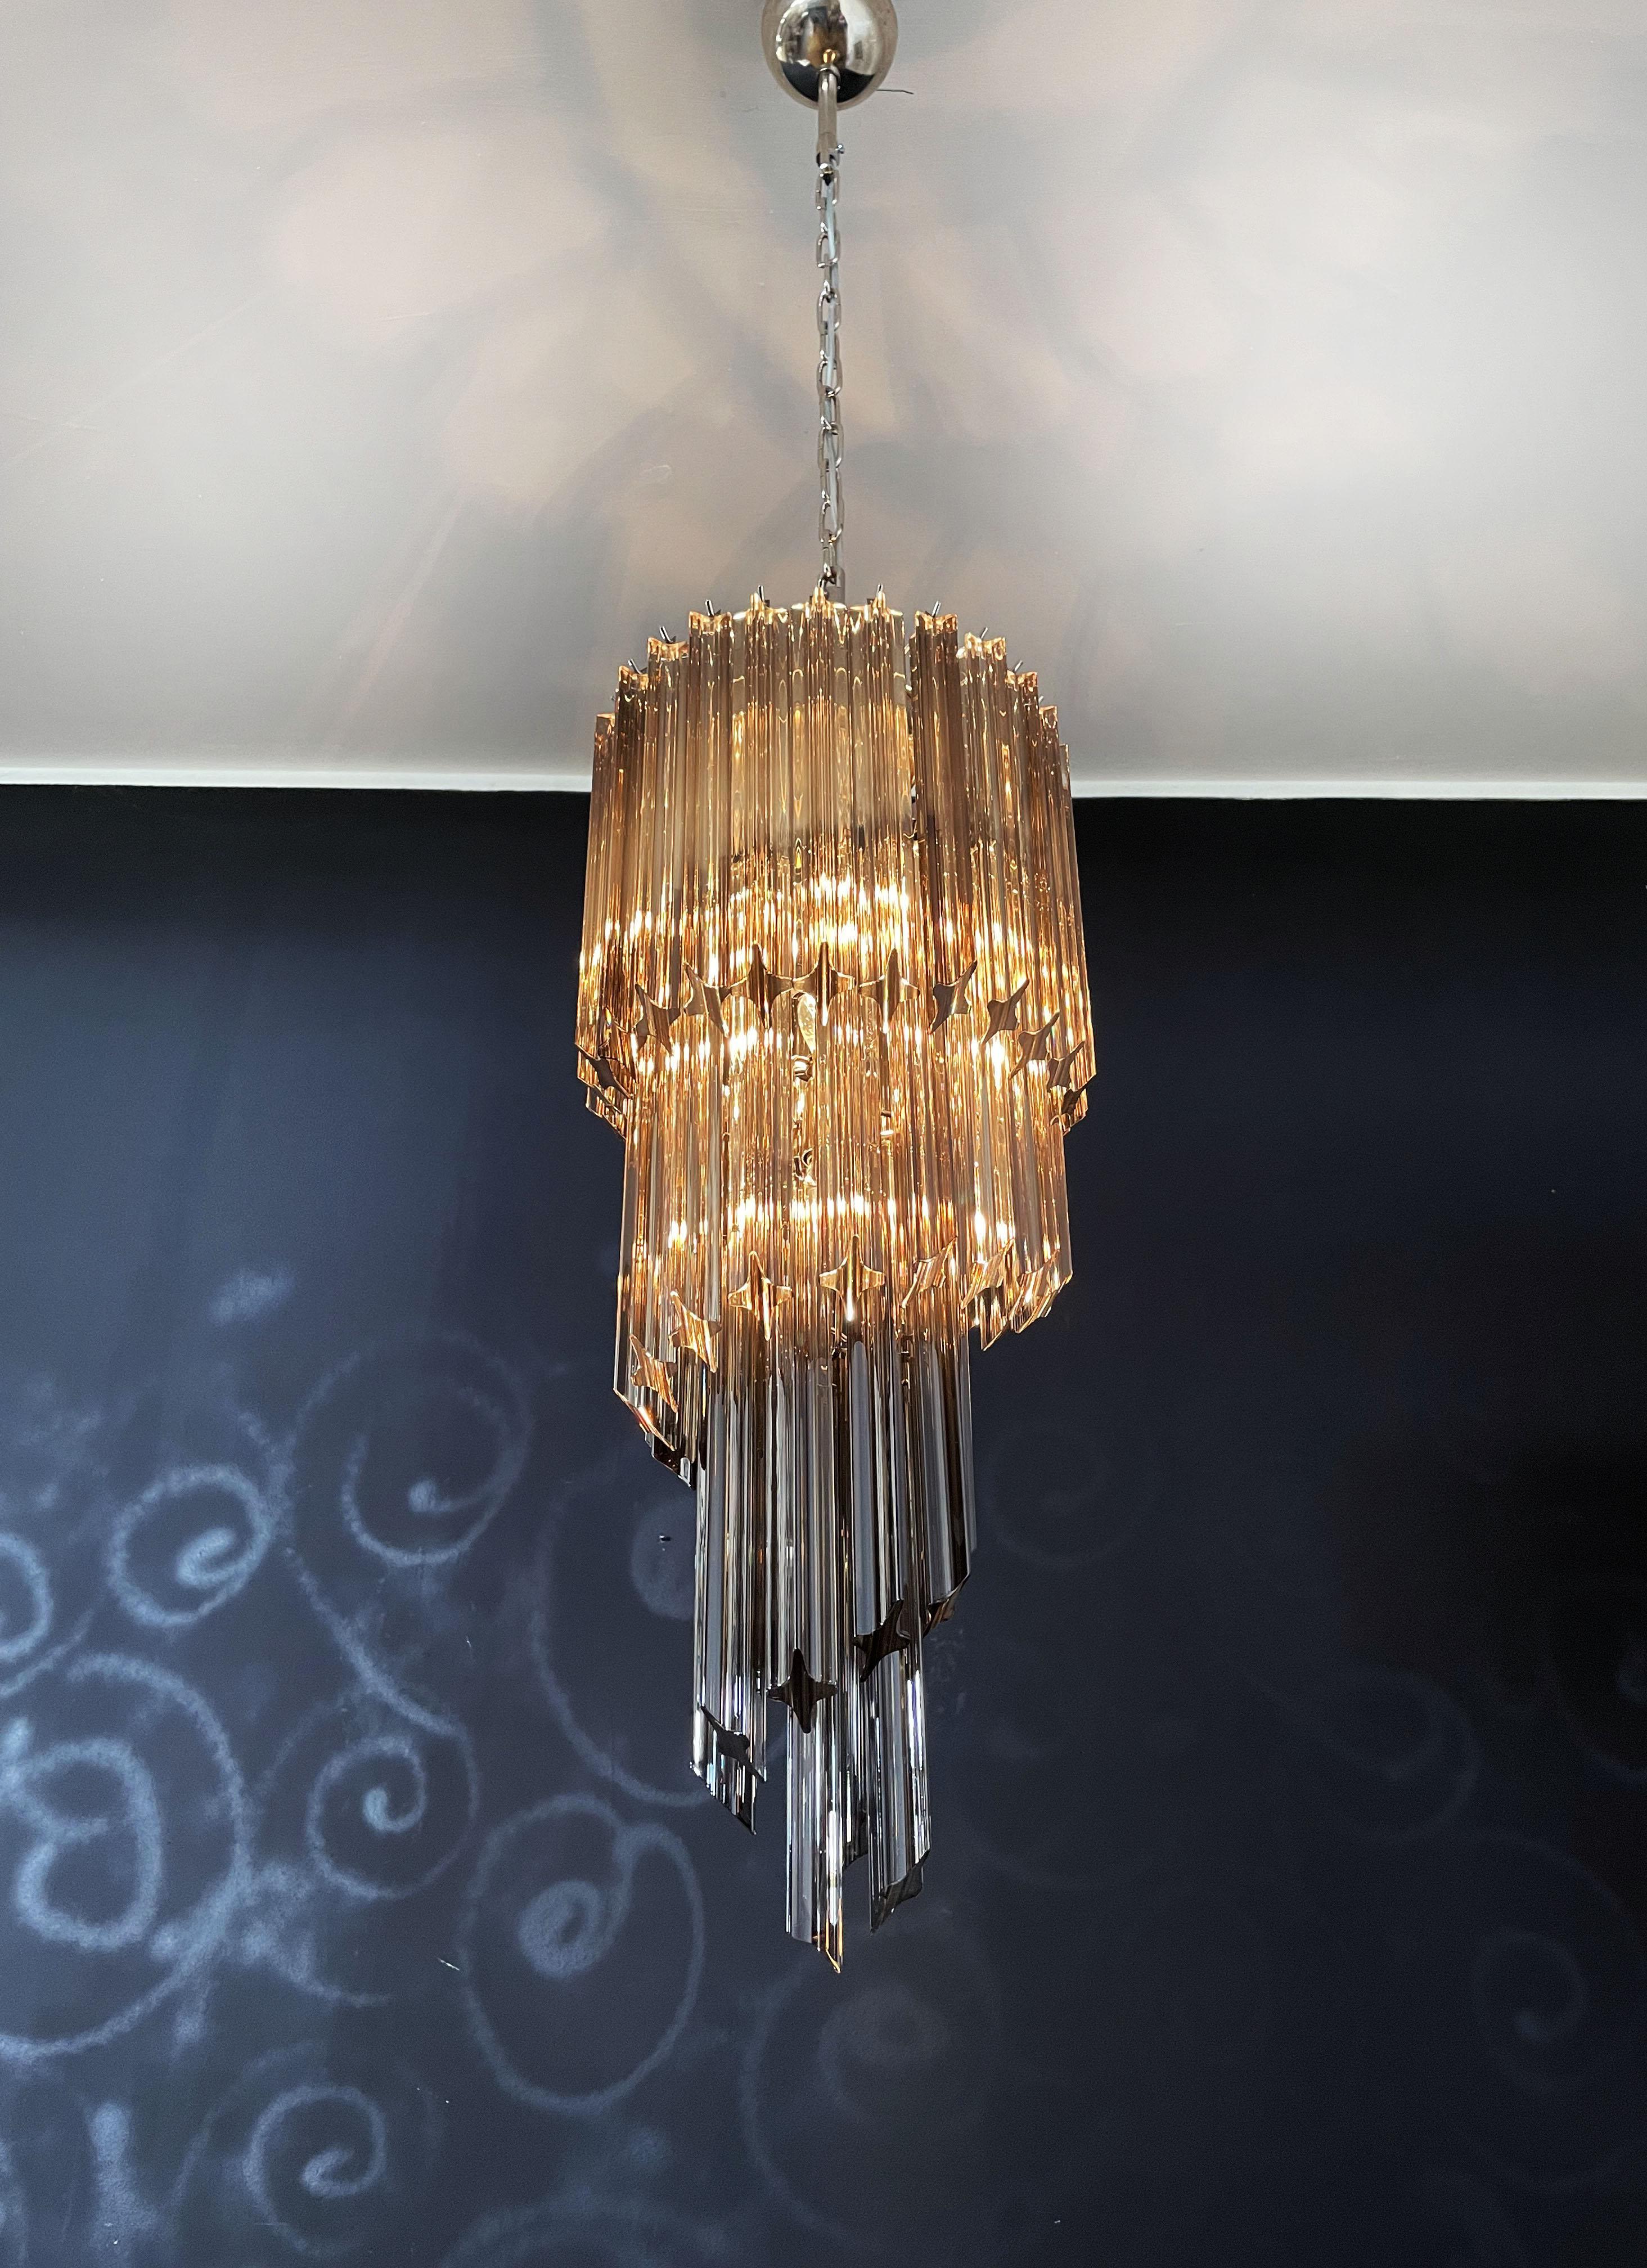 Fantastic Murano chandelier made by 54 Murano smoked crystal prism (quadriedri) in a chrome metal frame. The shape of this chandelier is spiral.
Period: late XX century
Dimensions: 63 inches height (160 cm) with chain; 35,45 inches height (90 cm)